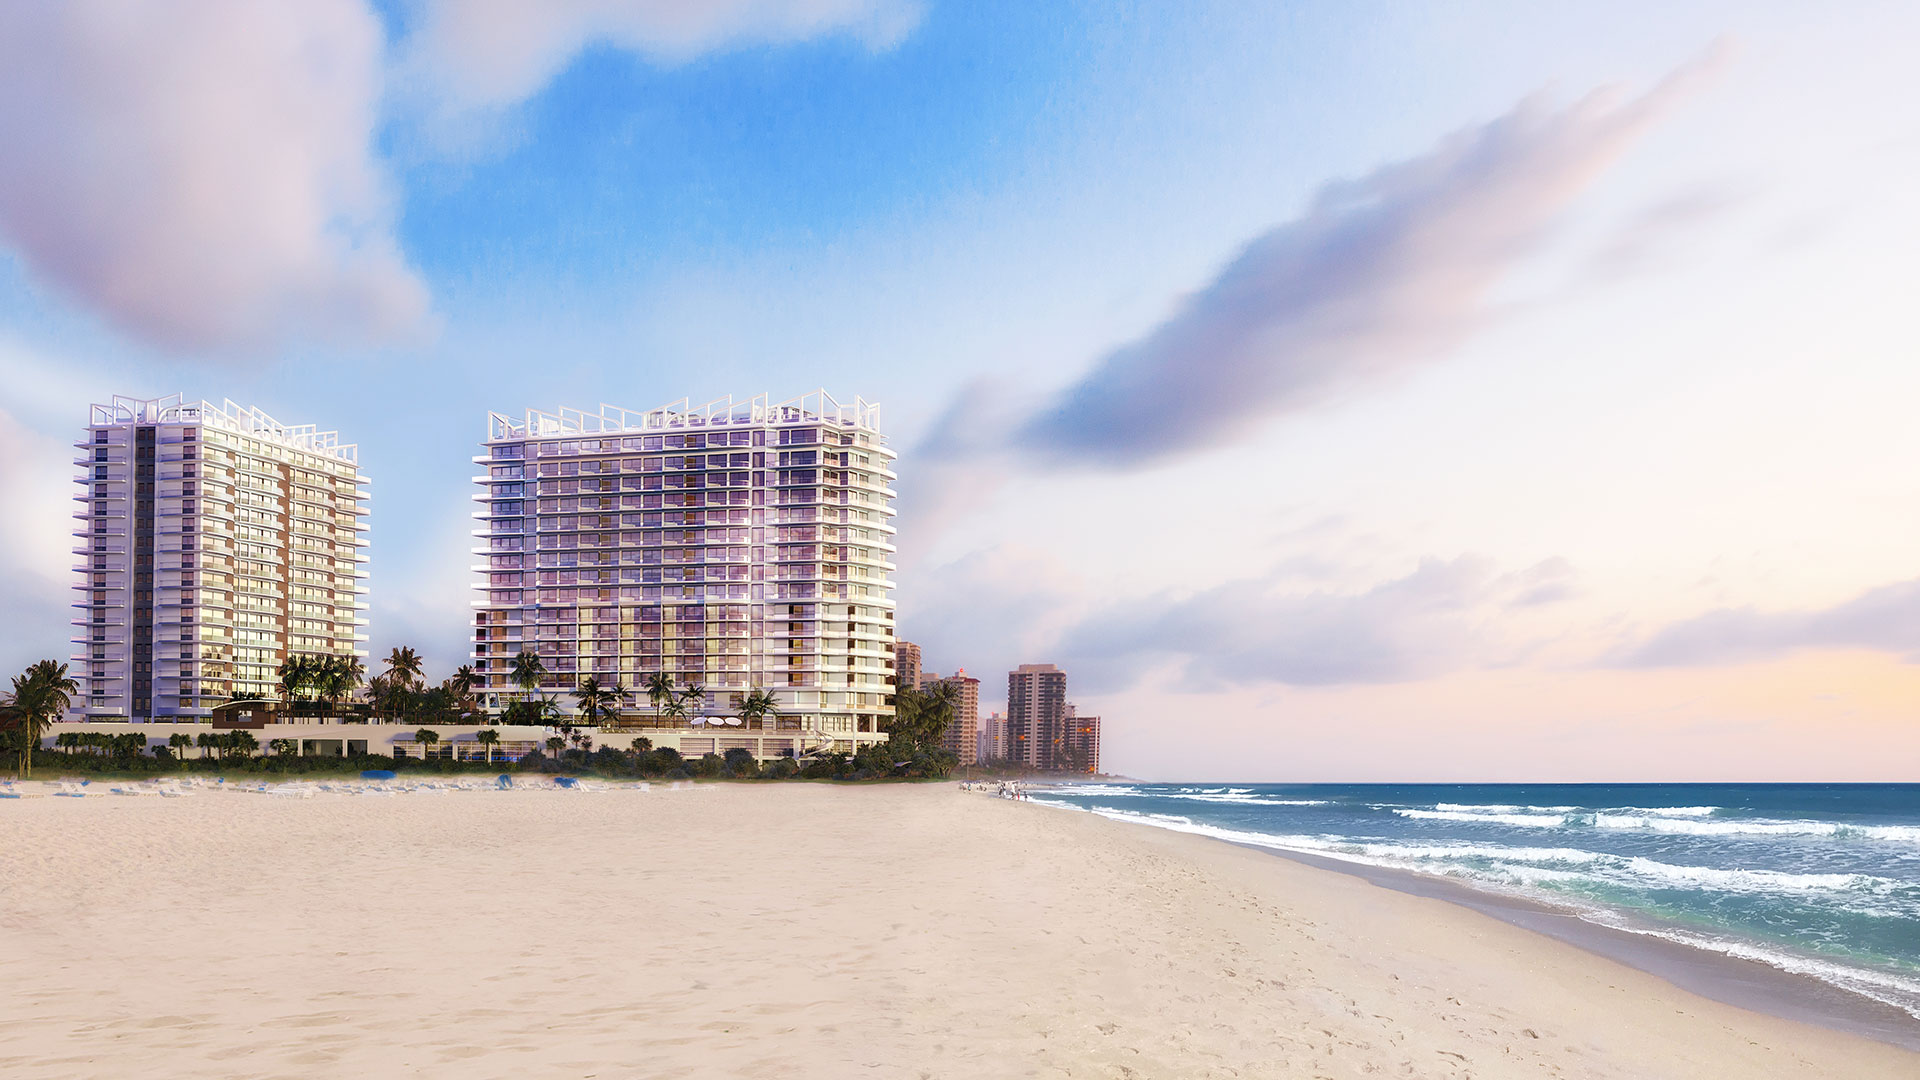 Singer Island’s Amrit Ocean Resort &#038; Residences Brings Mindful Living To Palm Beach County